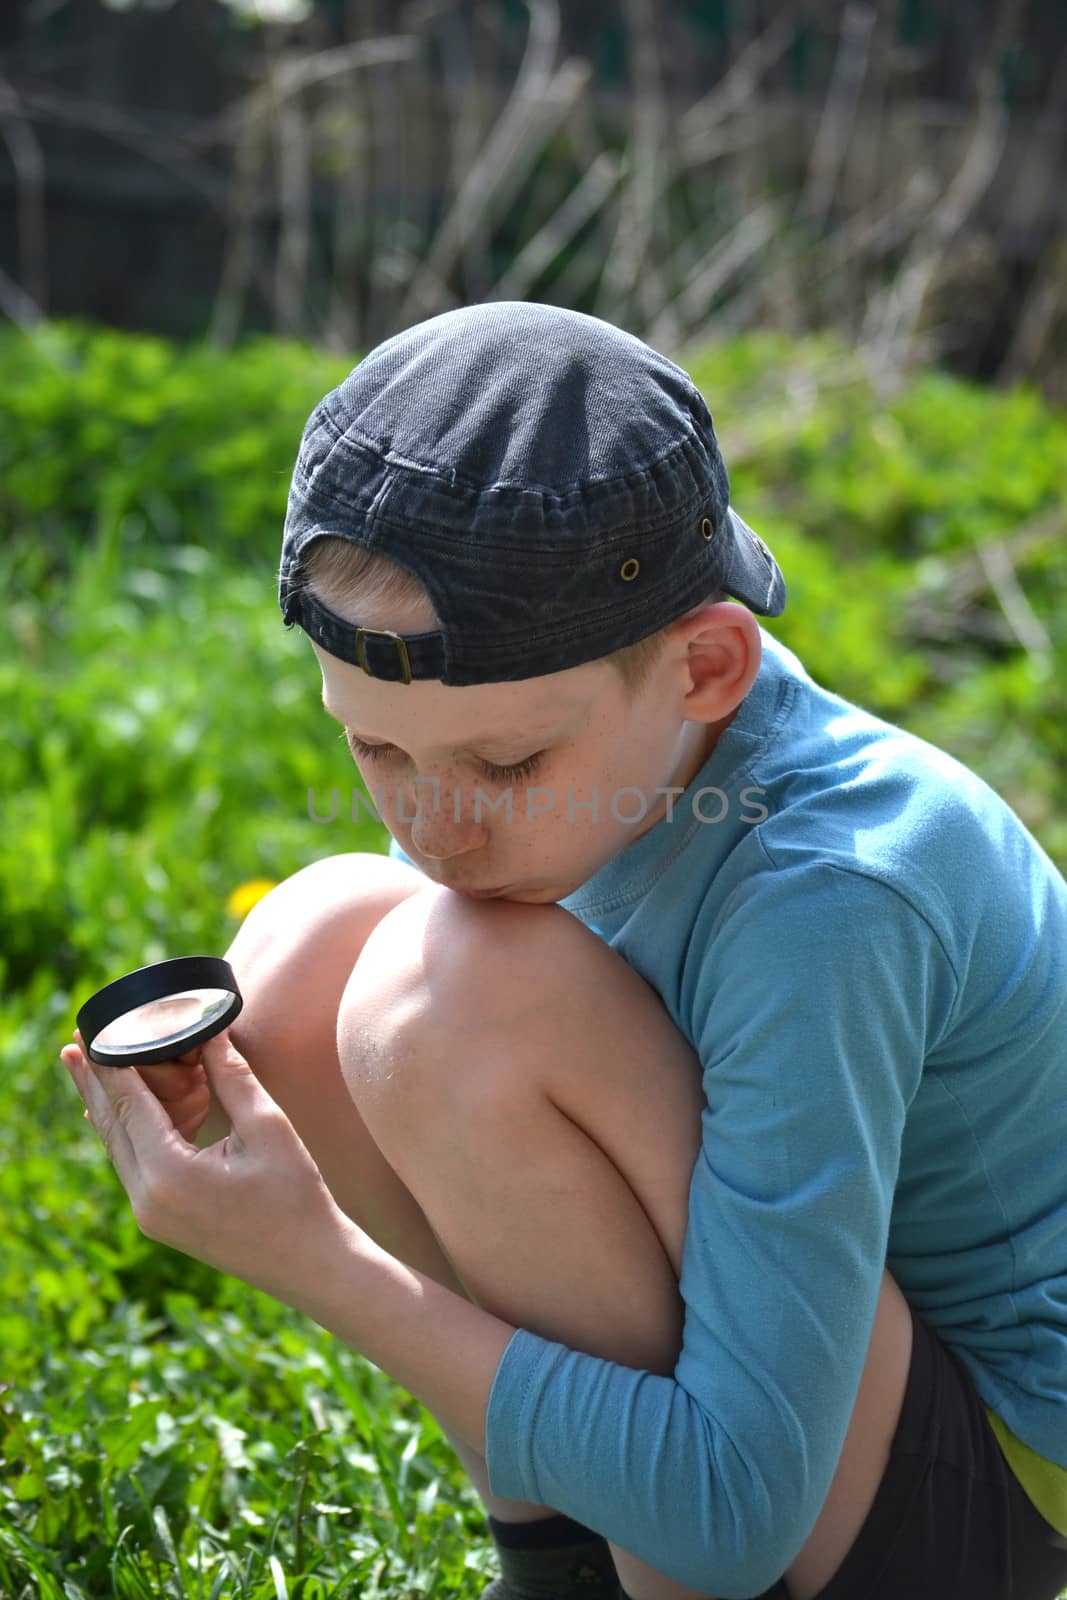 the teenager observes through magnifying glass